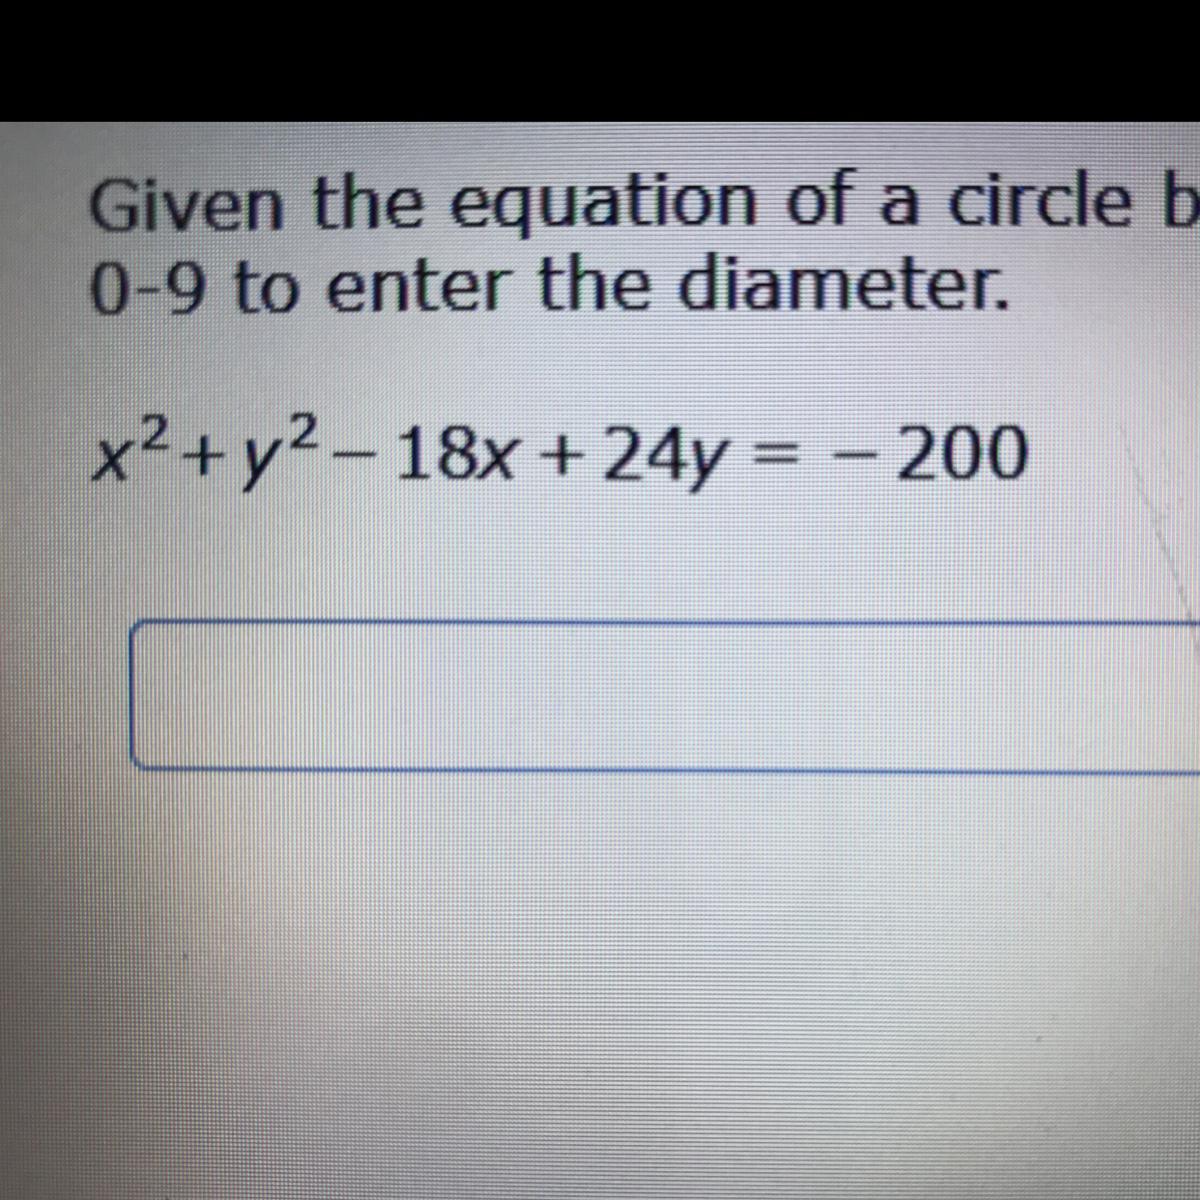 Given The Equation Of A Circle Below, Find The Diameter Of The Circle. Use Only The Digits 0-9 To Enter